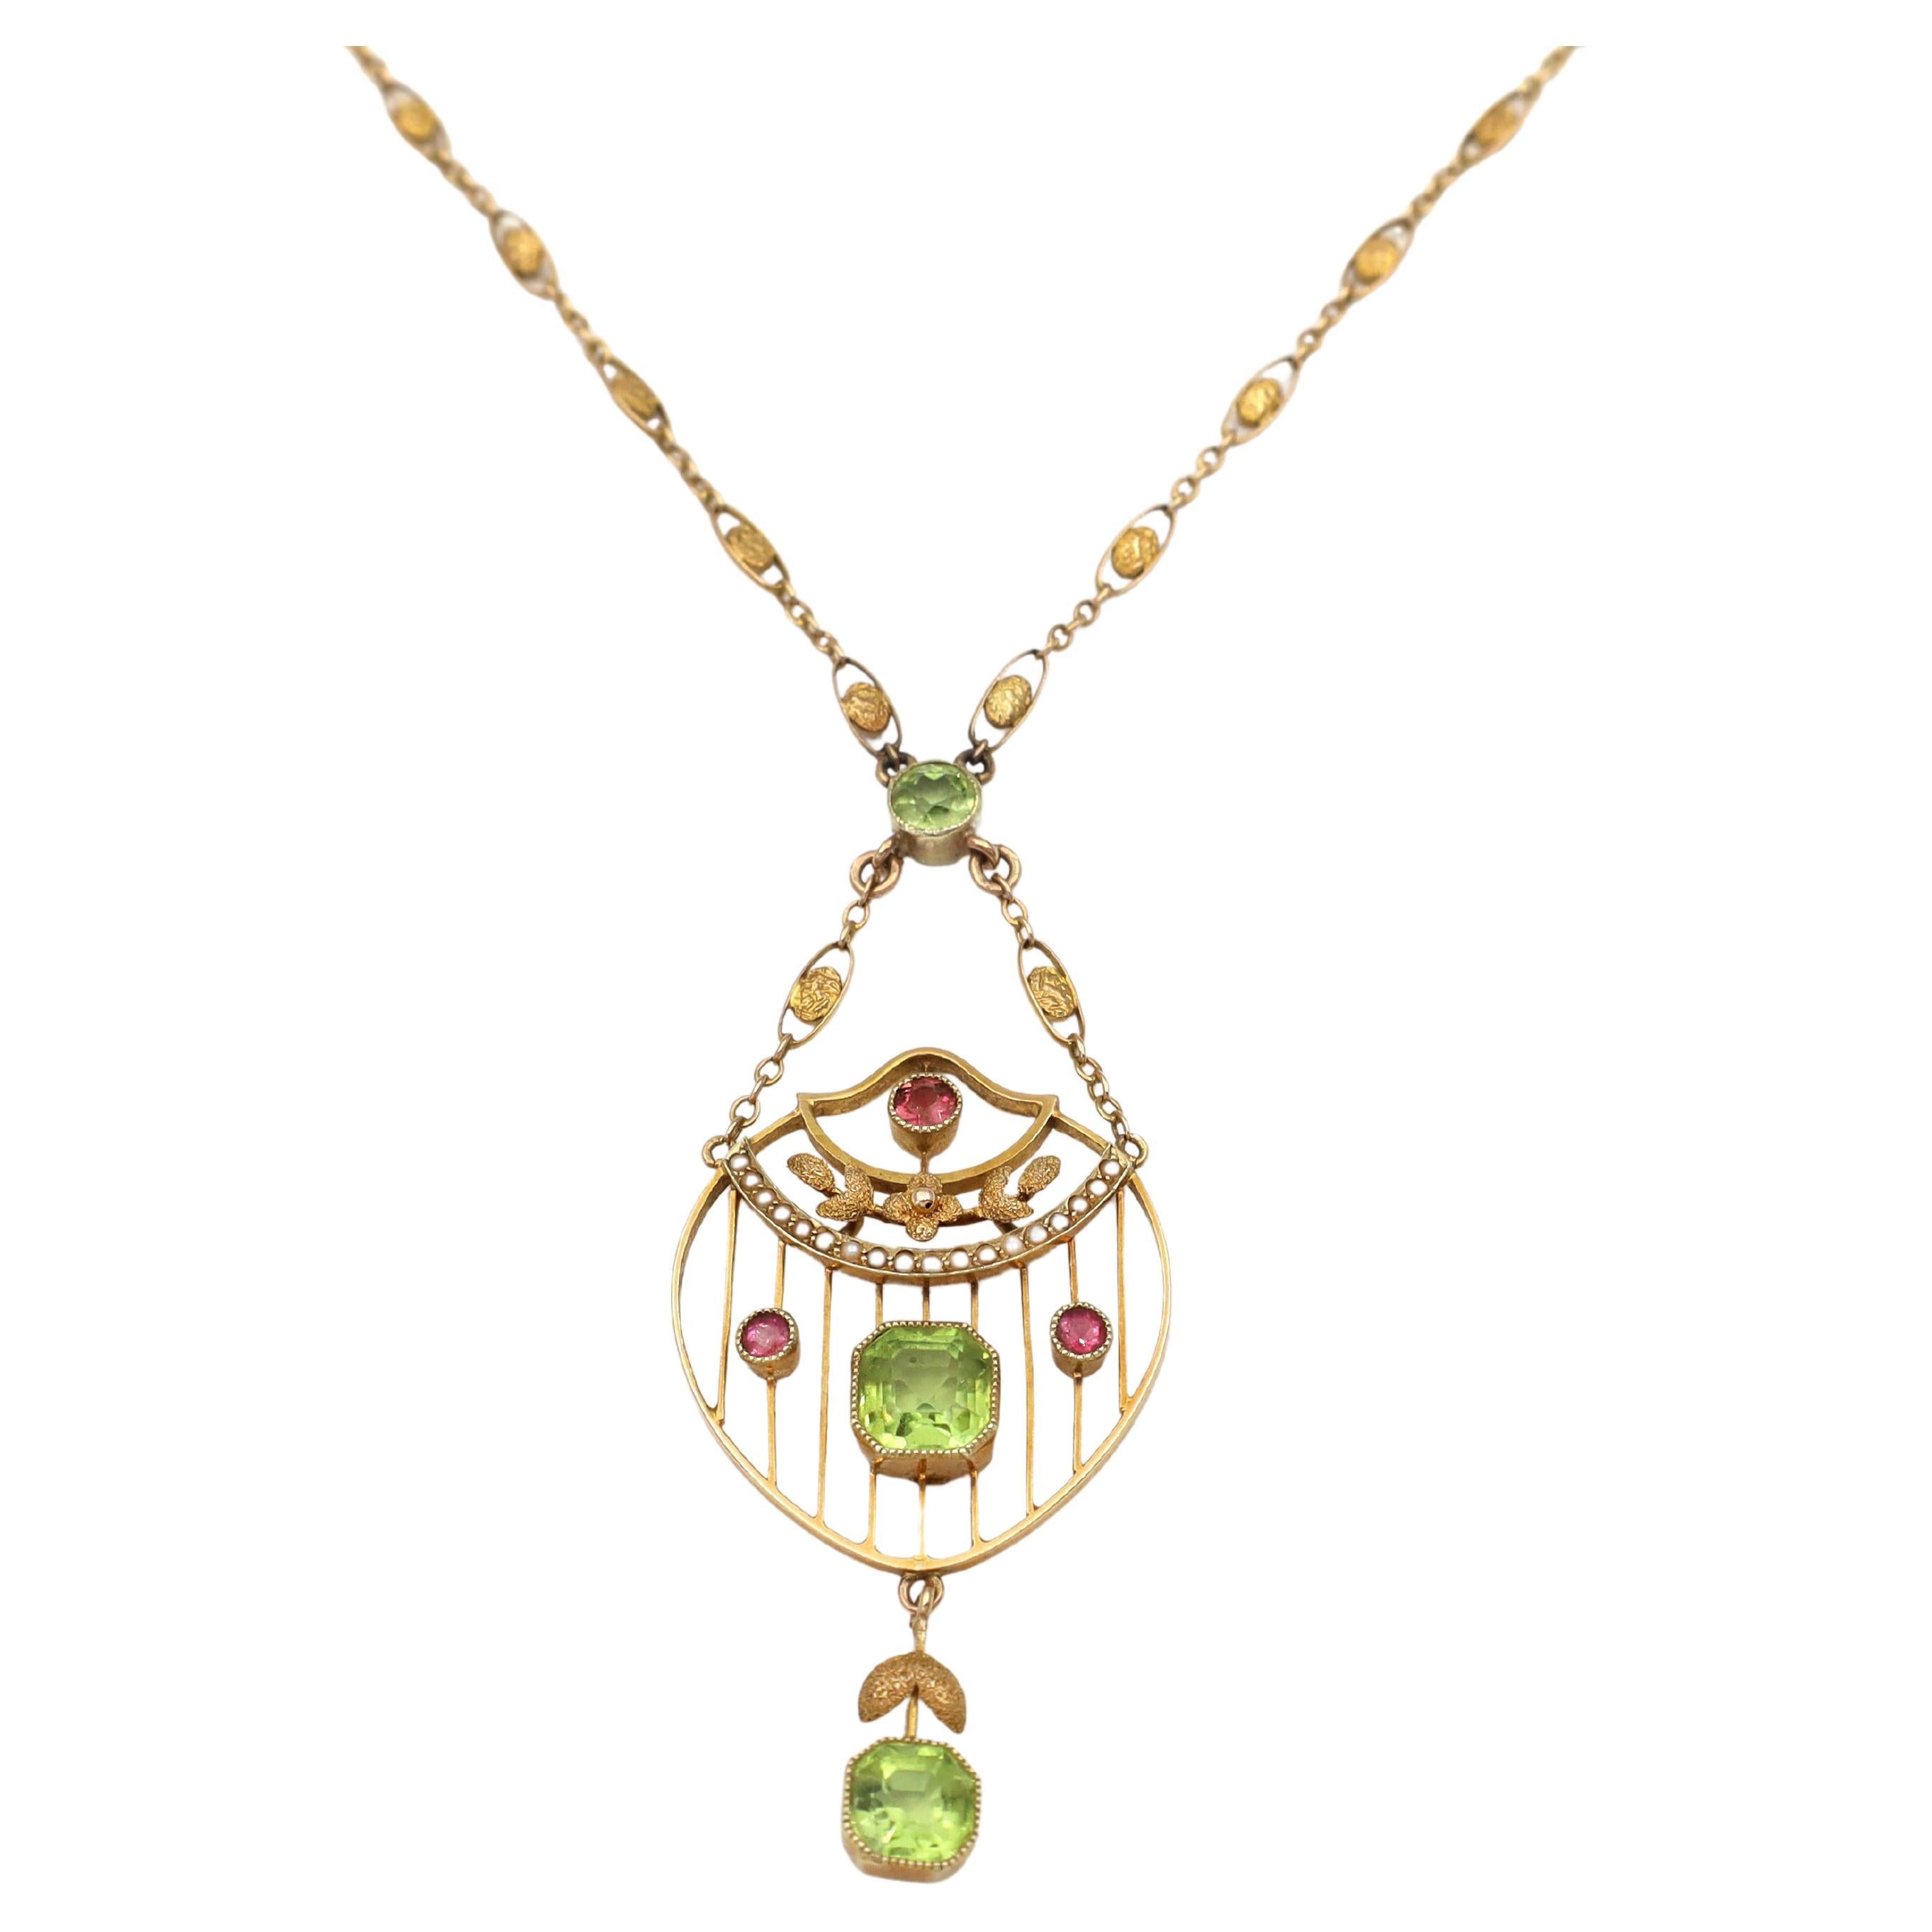 Edwardian Suffragette Peridot, Pearl and Amethyst Necklace in 15kt Yellow Gold